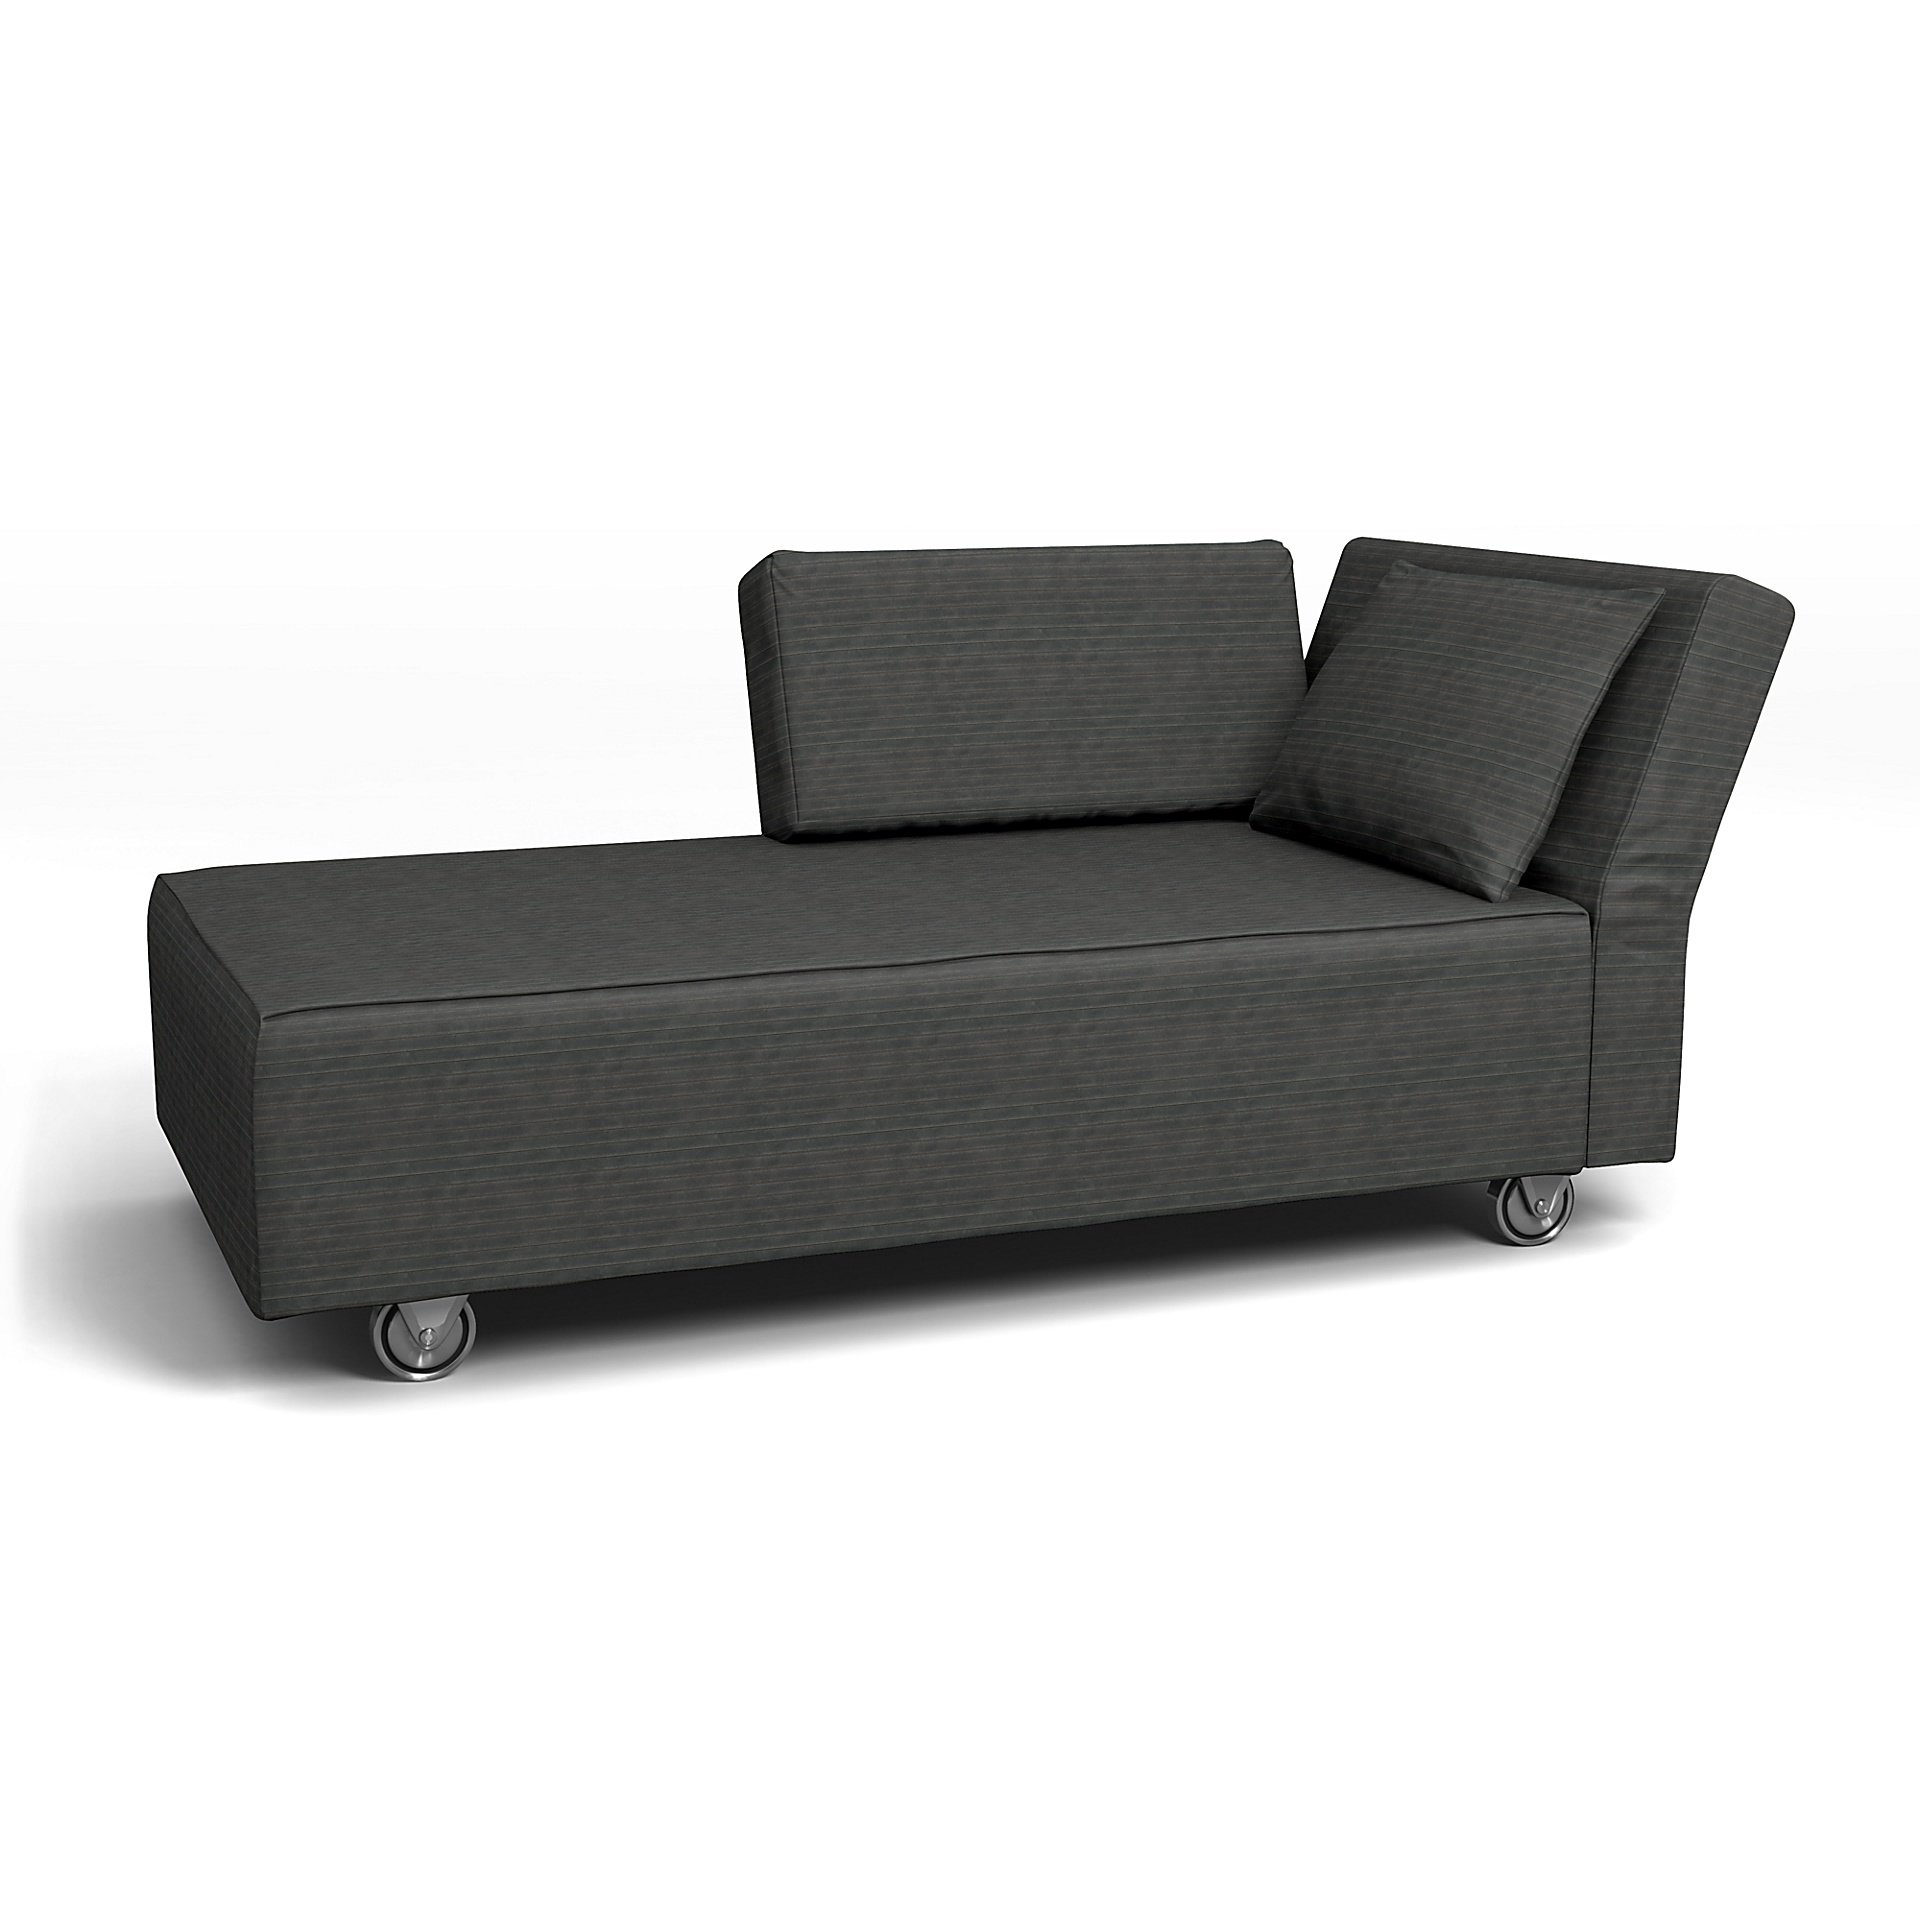 IKEA - Falsterbo Chaise with Right Armrest Cover, Licorice, Corduroy - Bemz